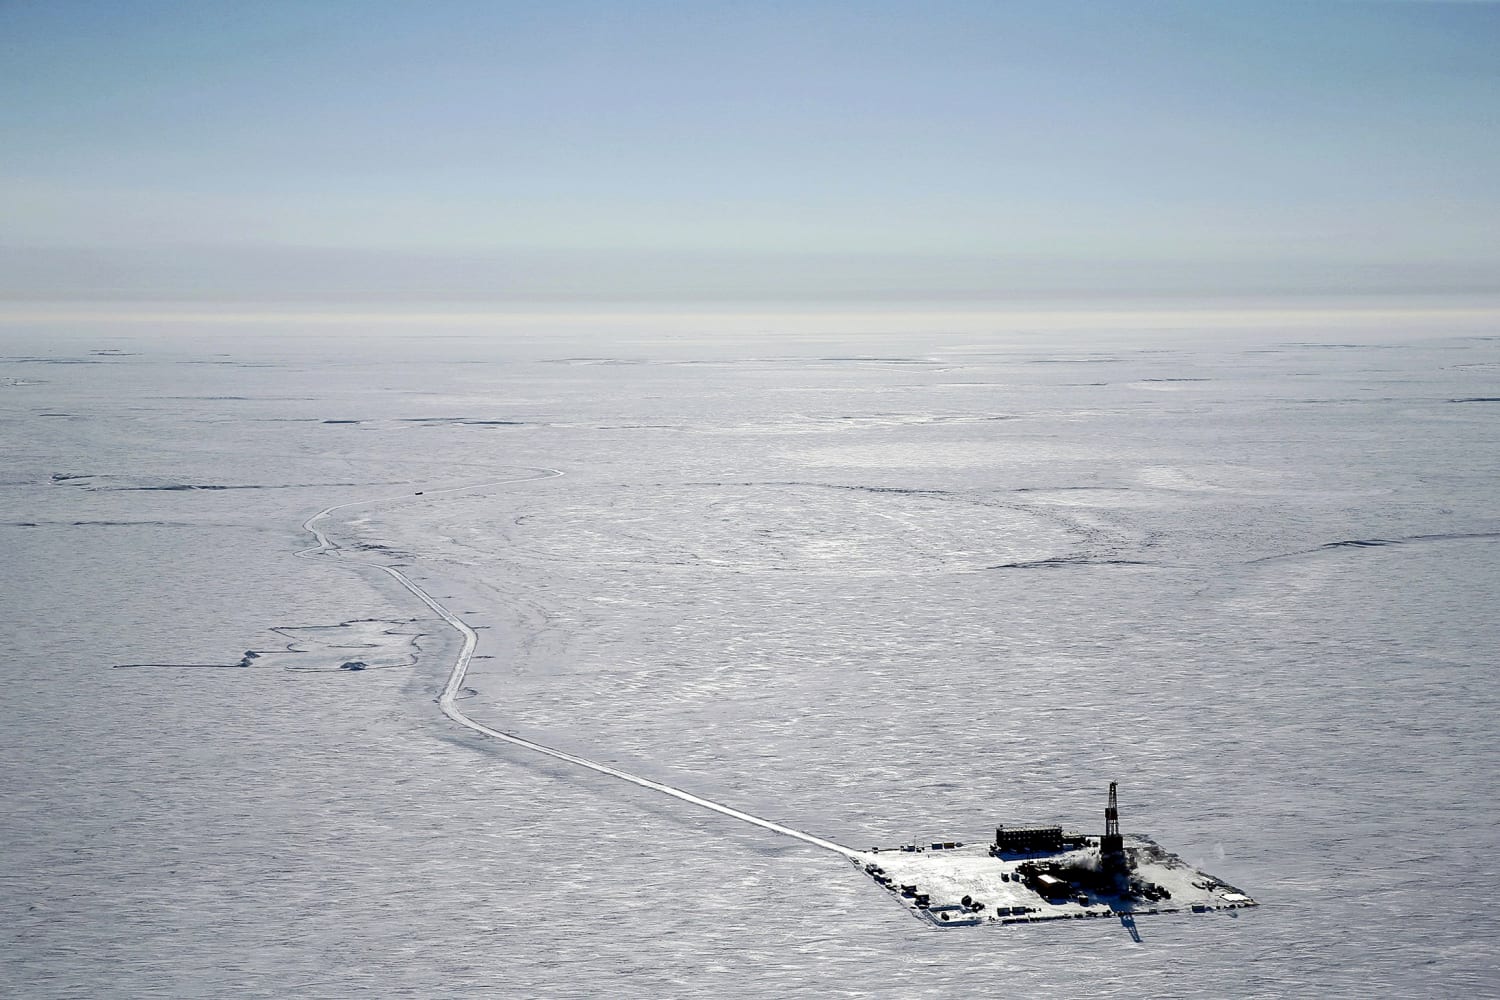 Biden administration approves controversial Alaska oil drilling project